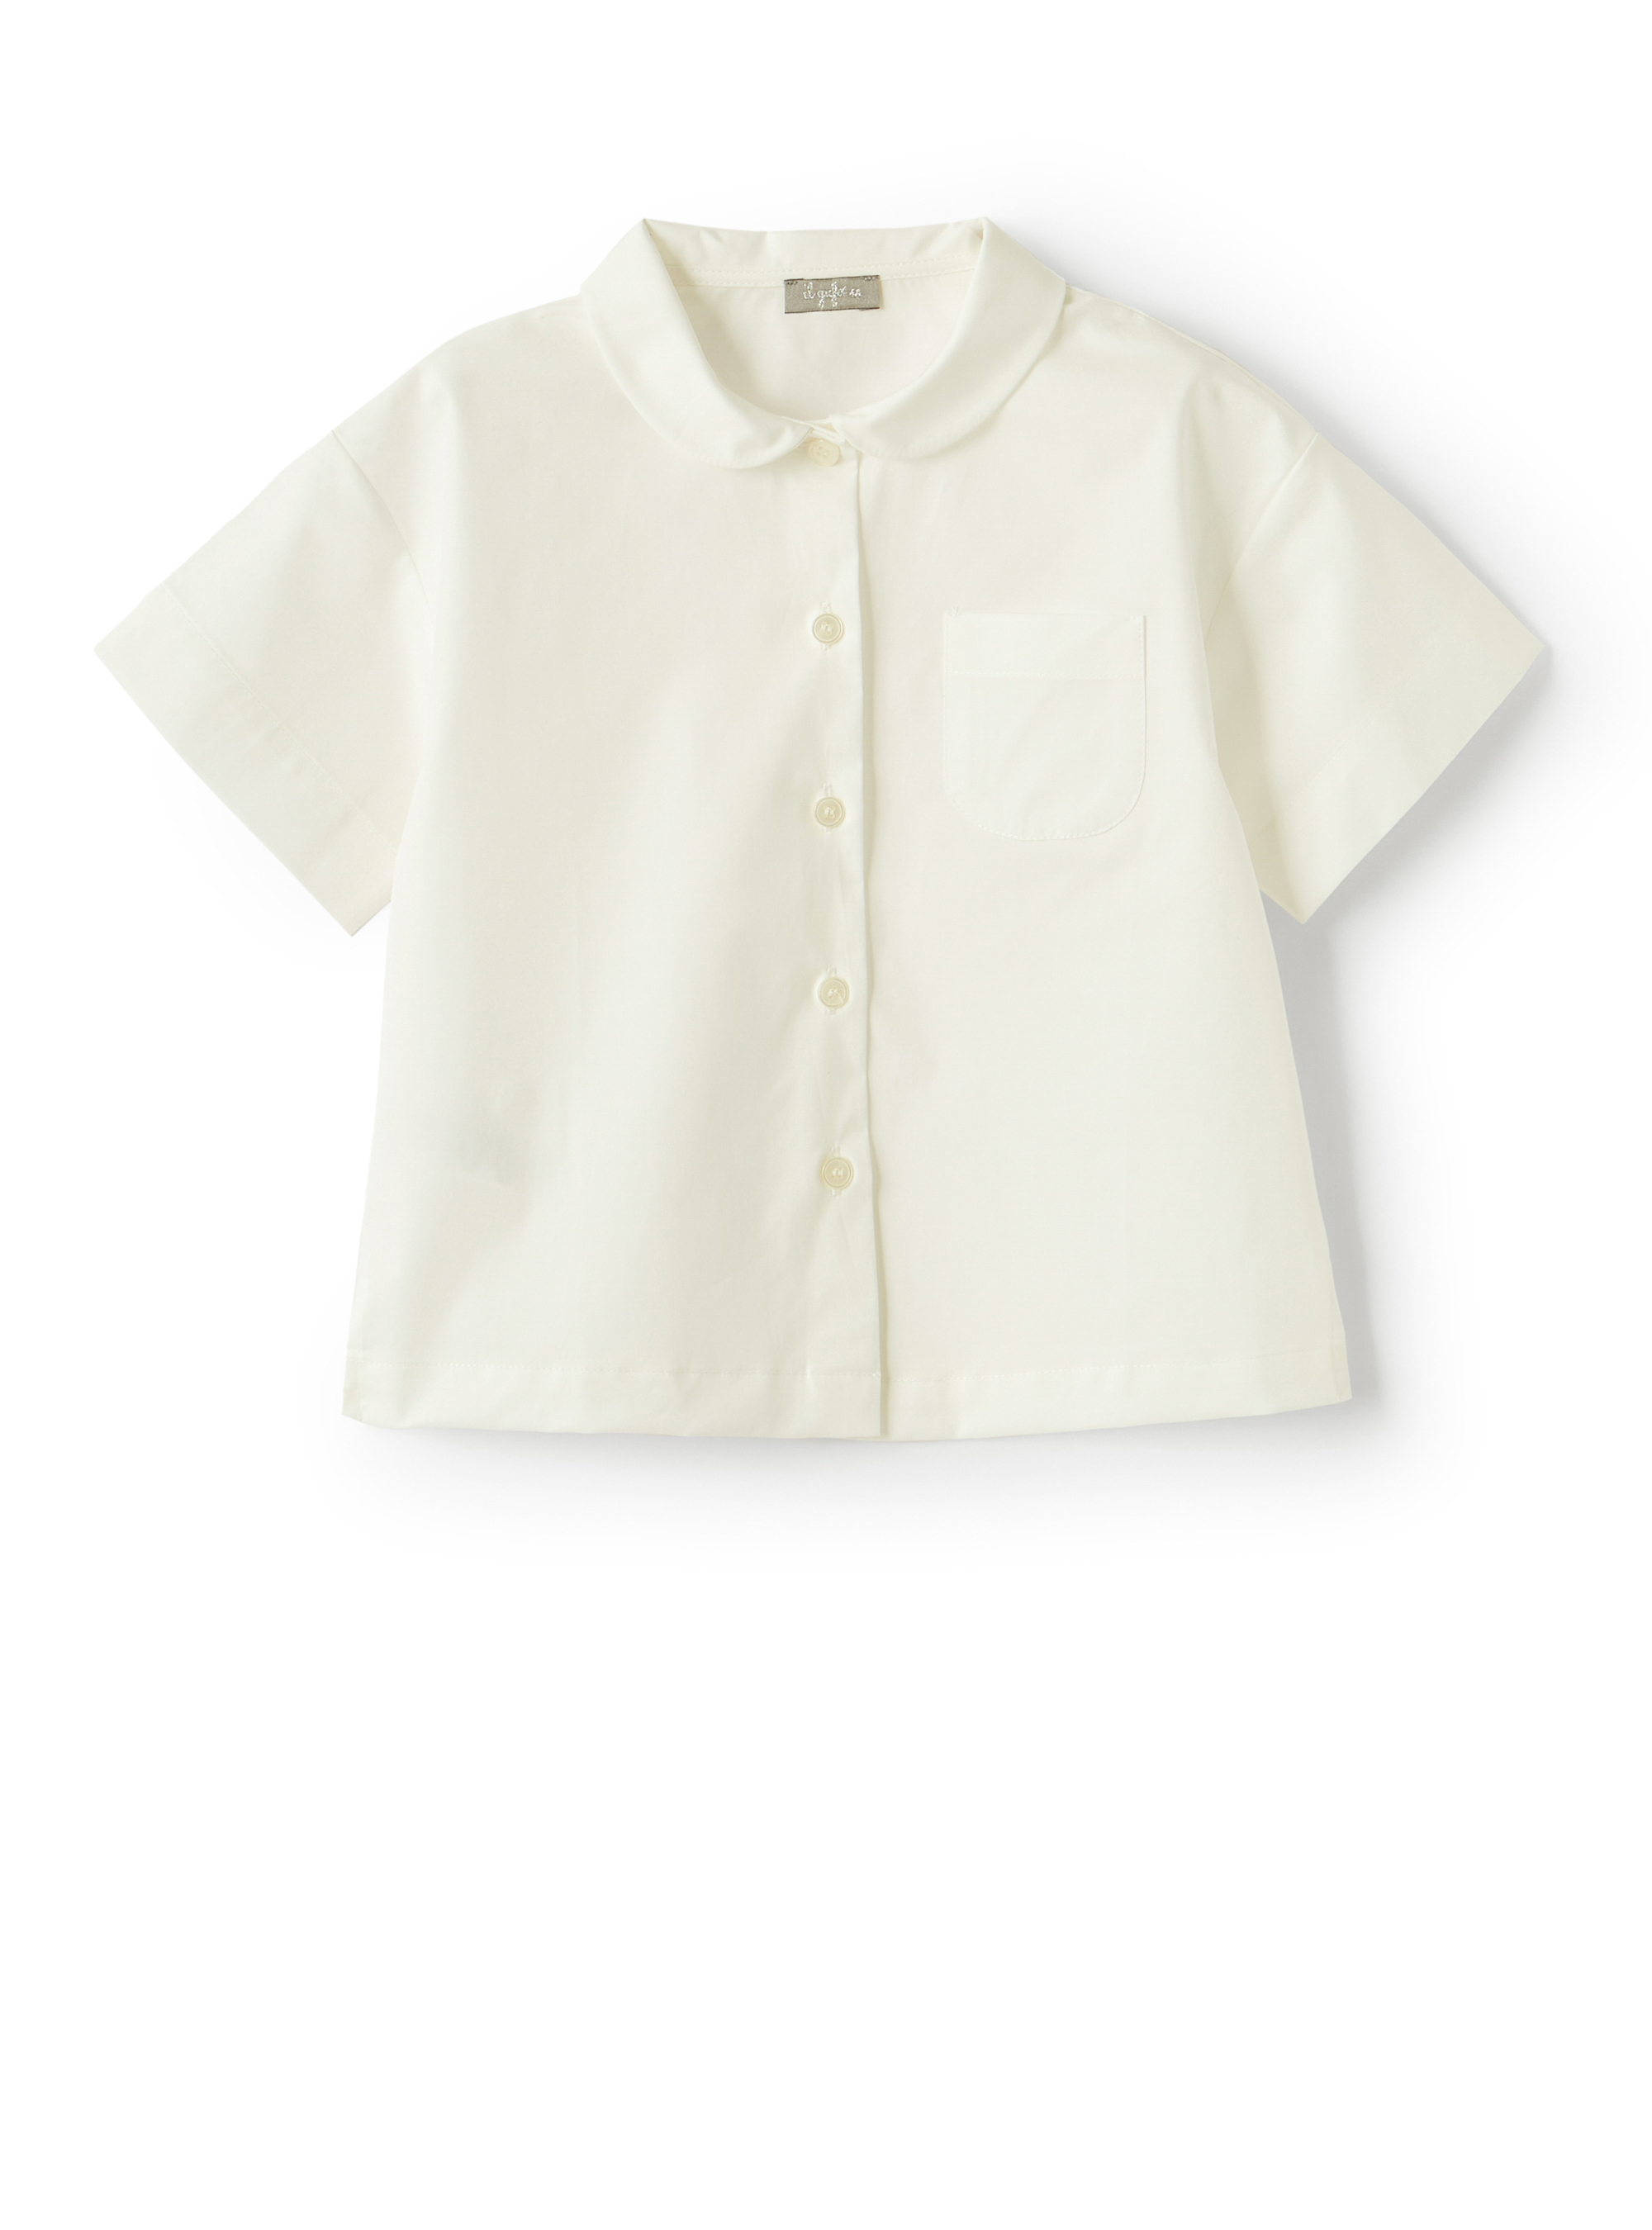 White cotton shirt with breast pocket - Shirts - Il Gufo